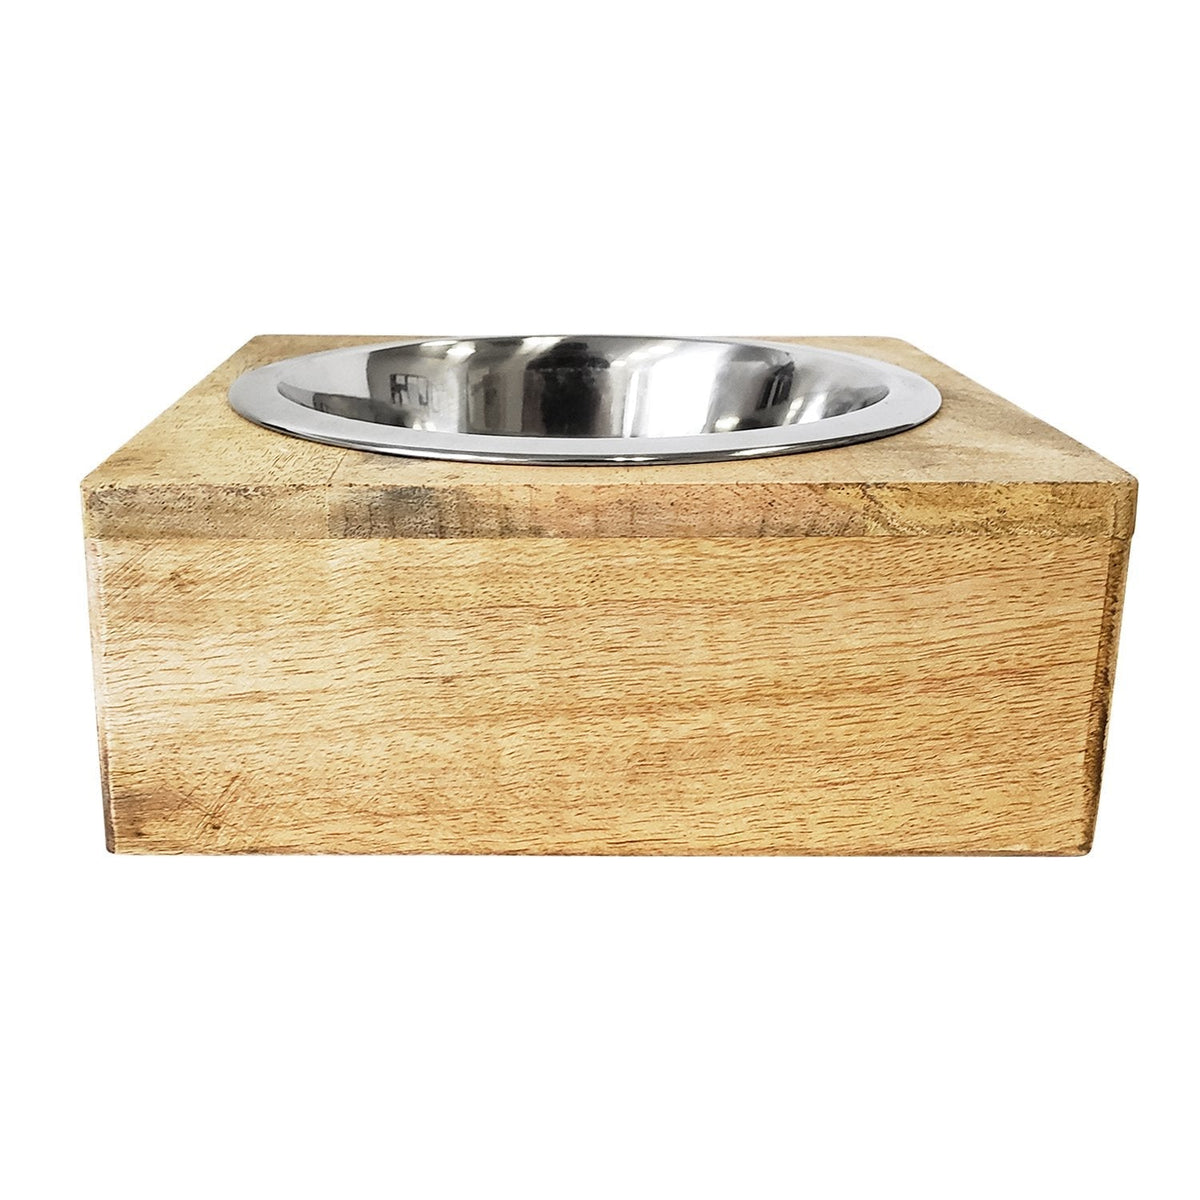 Stainless Steel Dog Bowl with Square Mango Wood Holder (1qt) by American Pet Supplies